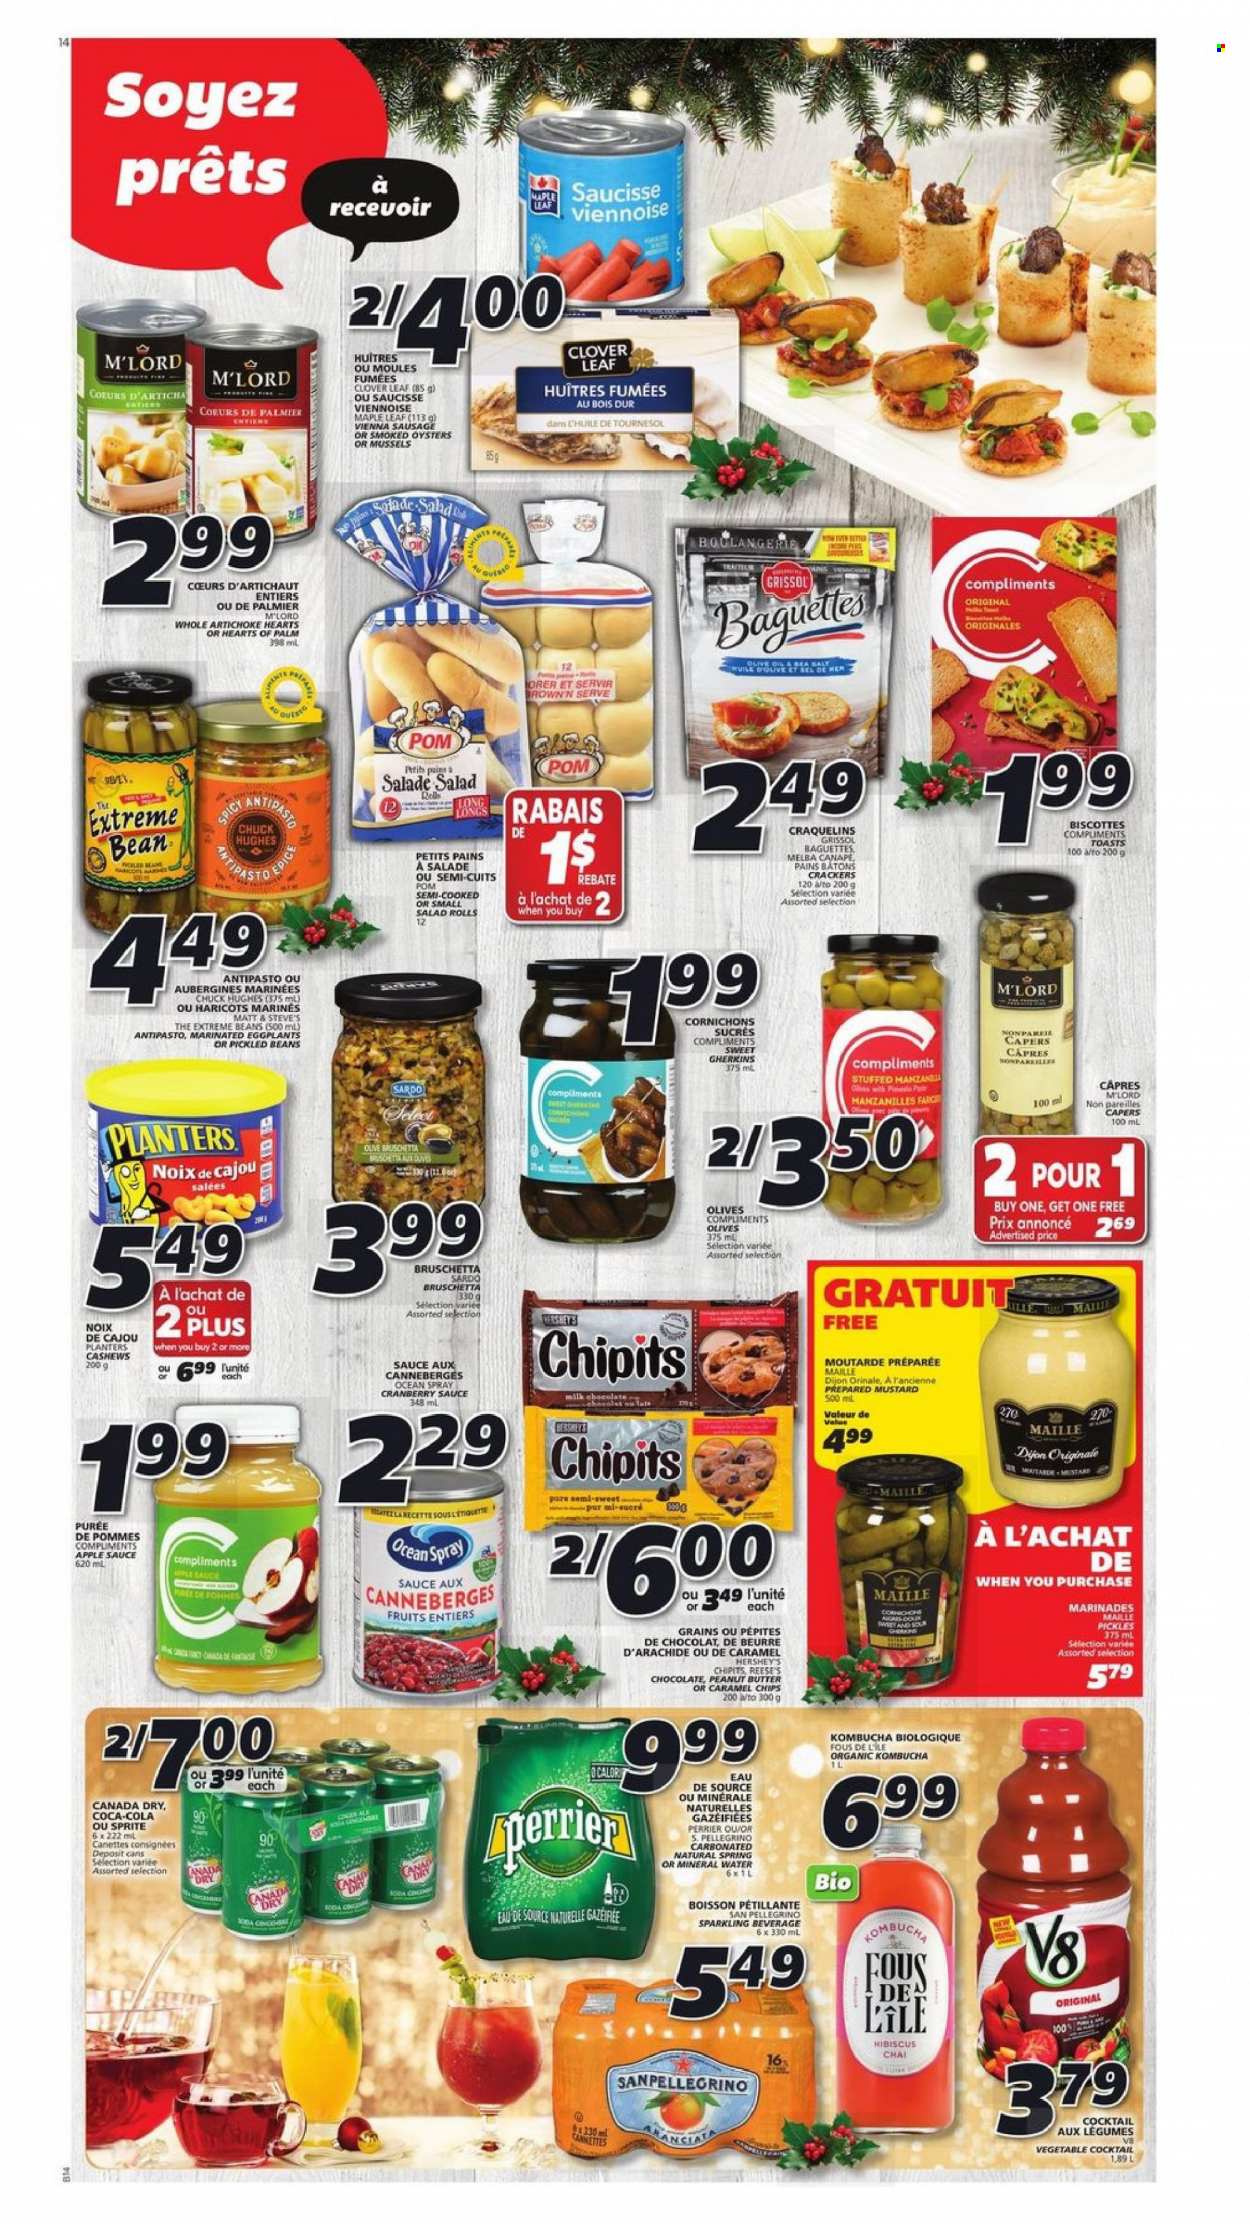 thumbnail - IGA Flyer - December 23, 2021 - December 29, 2021 - Sales products - artichoke, beans, hearts of palm, salad, eggplant, mussels, smoked oysters, oysters, sauce, bruschetta, sausage, vienna sausage, Clover, Reese's, Hershey's, chocolate, crackers, capers, pickles, mustard, olive oil, oil, apple sauce, cranberry sauce, peanut butter, cashews, Planters, Canada Dry, Sprite, Perrier, mineral water, soda, San Pellegrino, kombucha, baguette, olives, chips. Page 14.